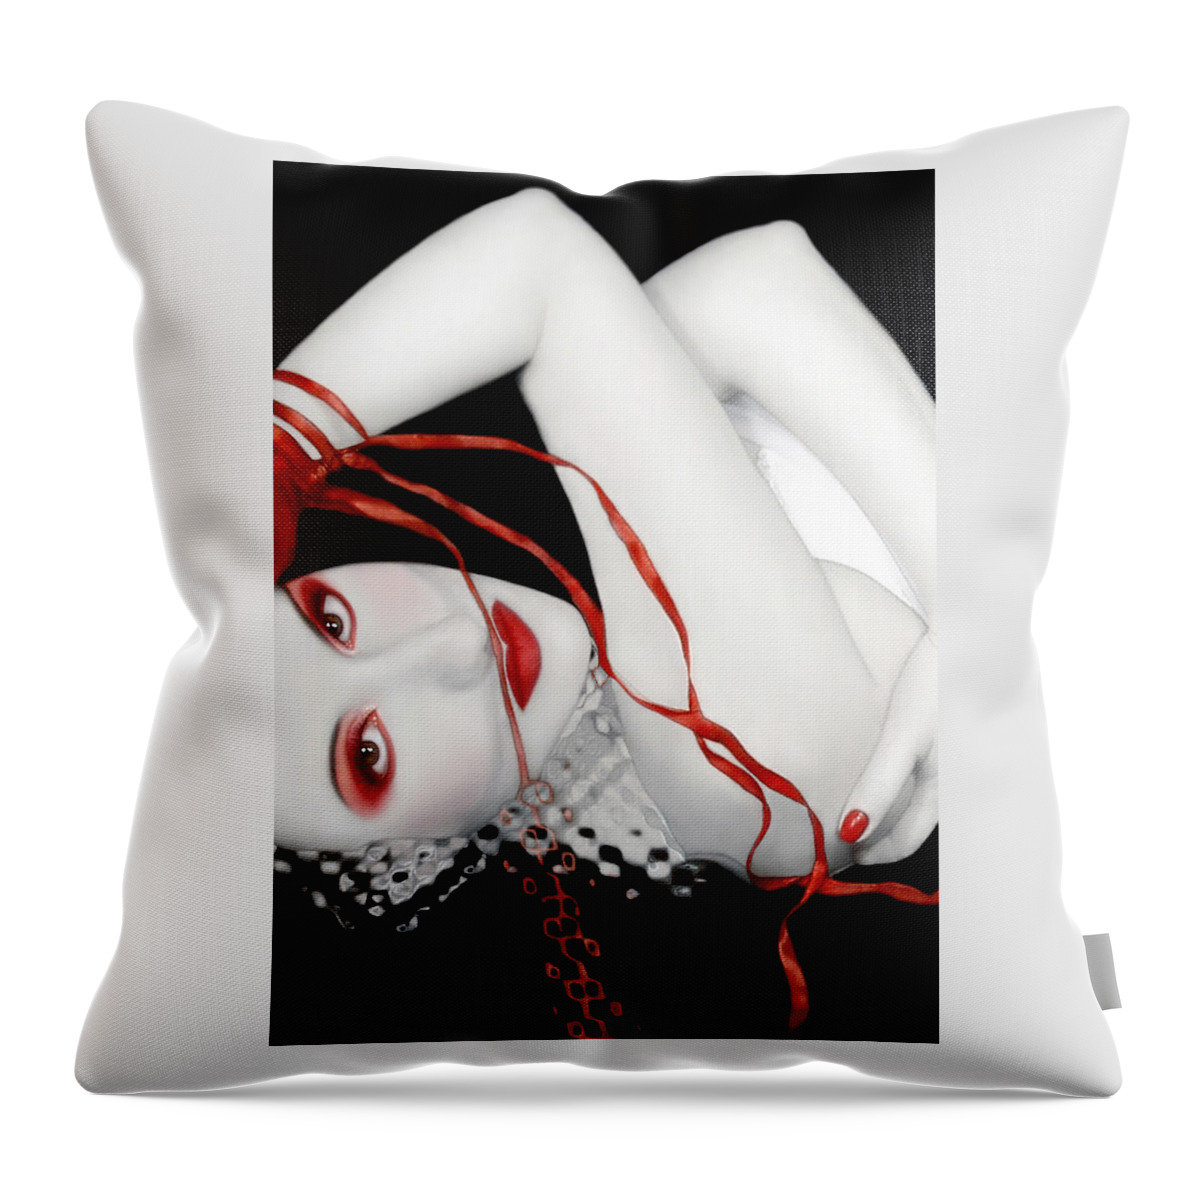 Beautiful Throw Pillow featuring the photograph The Red Facade by Jaeda DeWalt